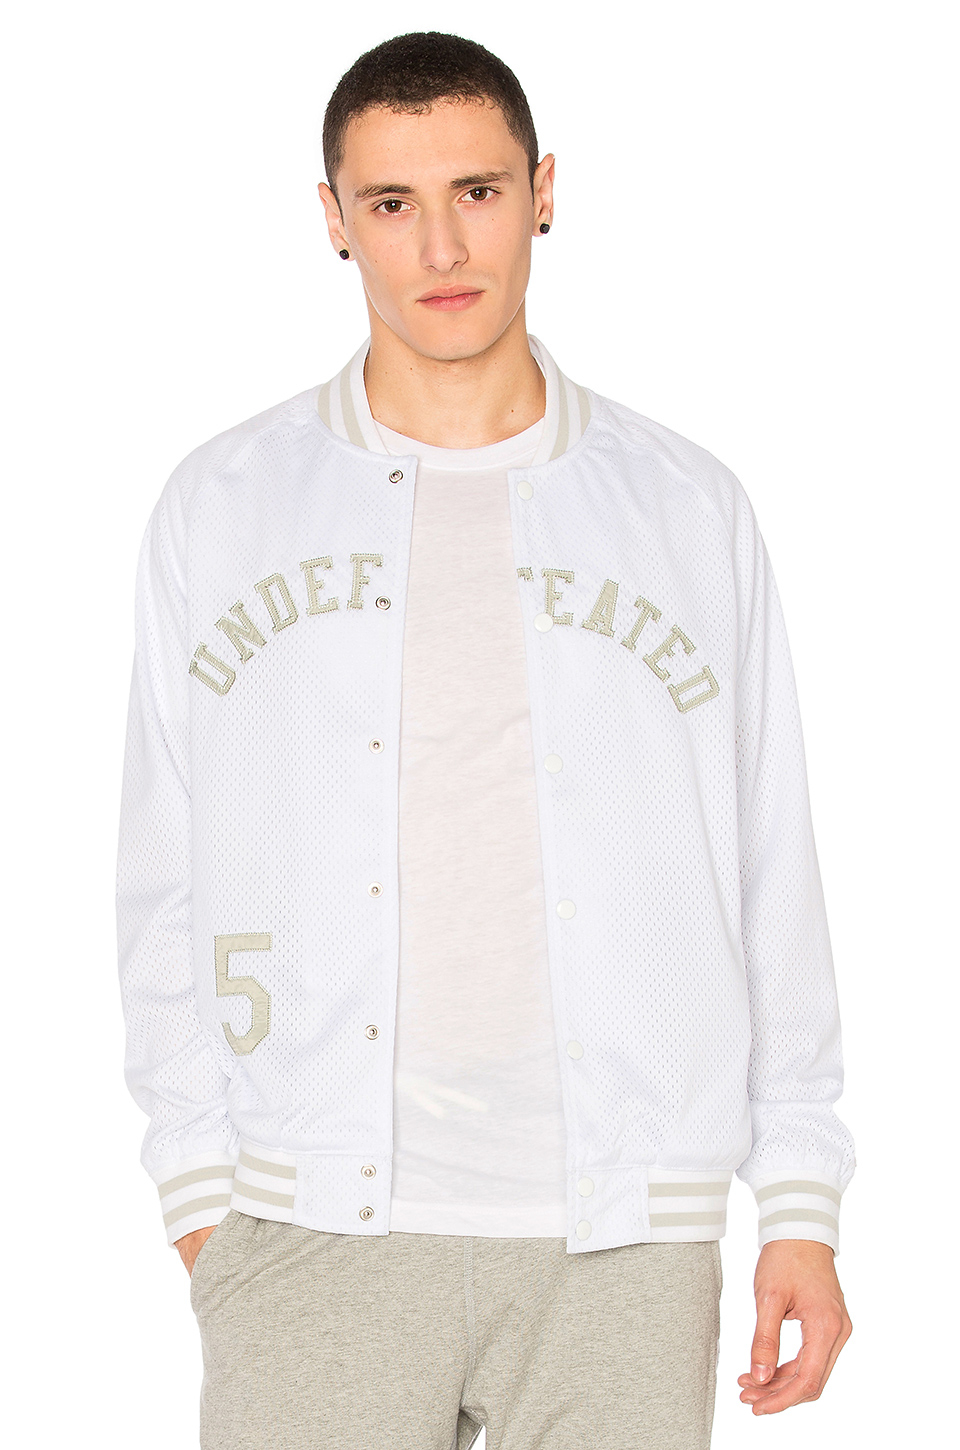 Lyst Undefeated Mesh Varsity Jacket In White For Men